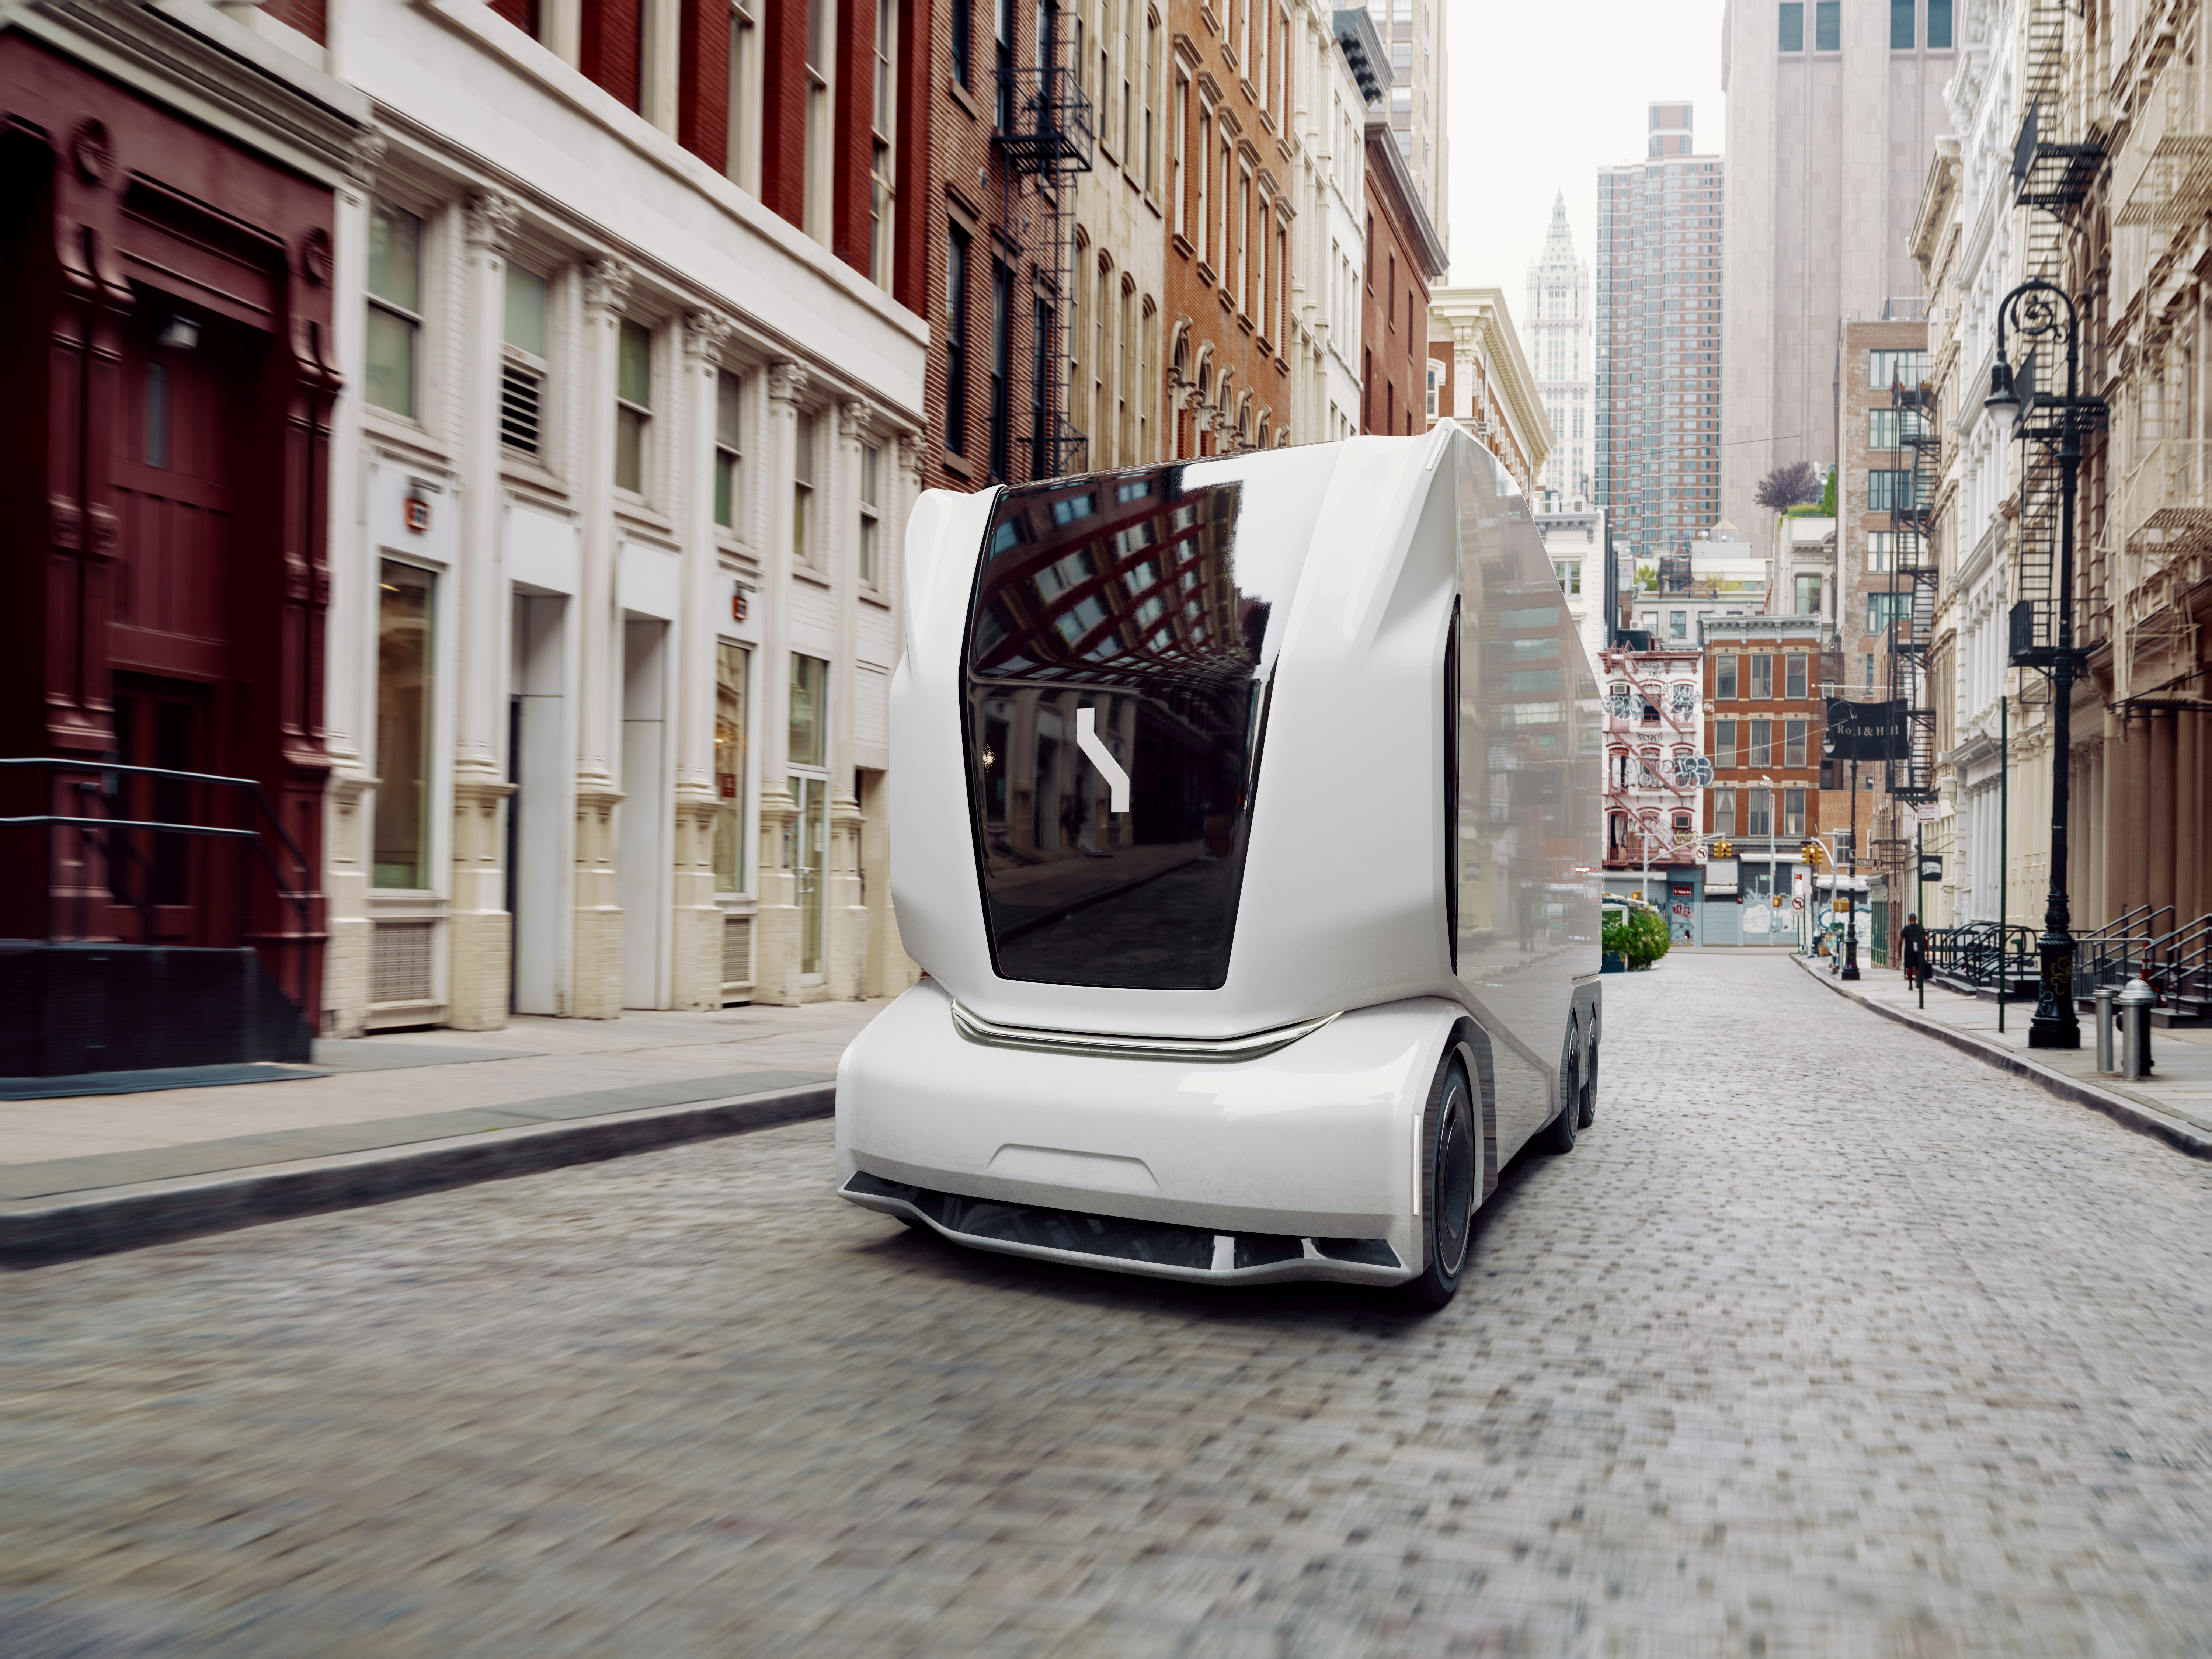 An Einride Pod, an electric self-driving truck developed by Einride, which has no cabin for a driver, is shown in this undated handout photo obtained by Reuters on November 3, 2021. Einride/Handout via REUTERS 